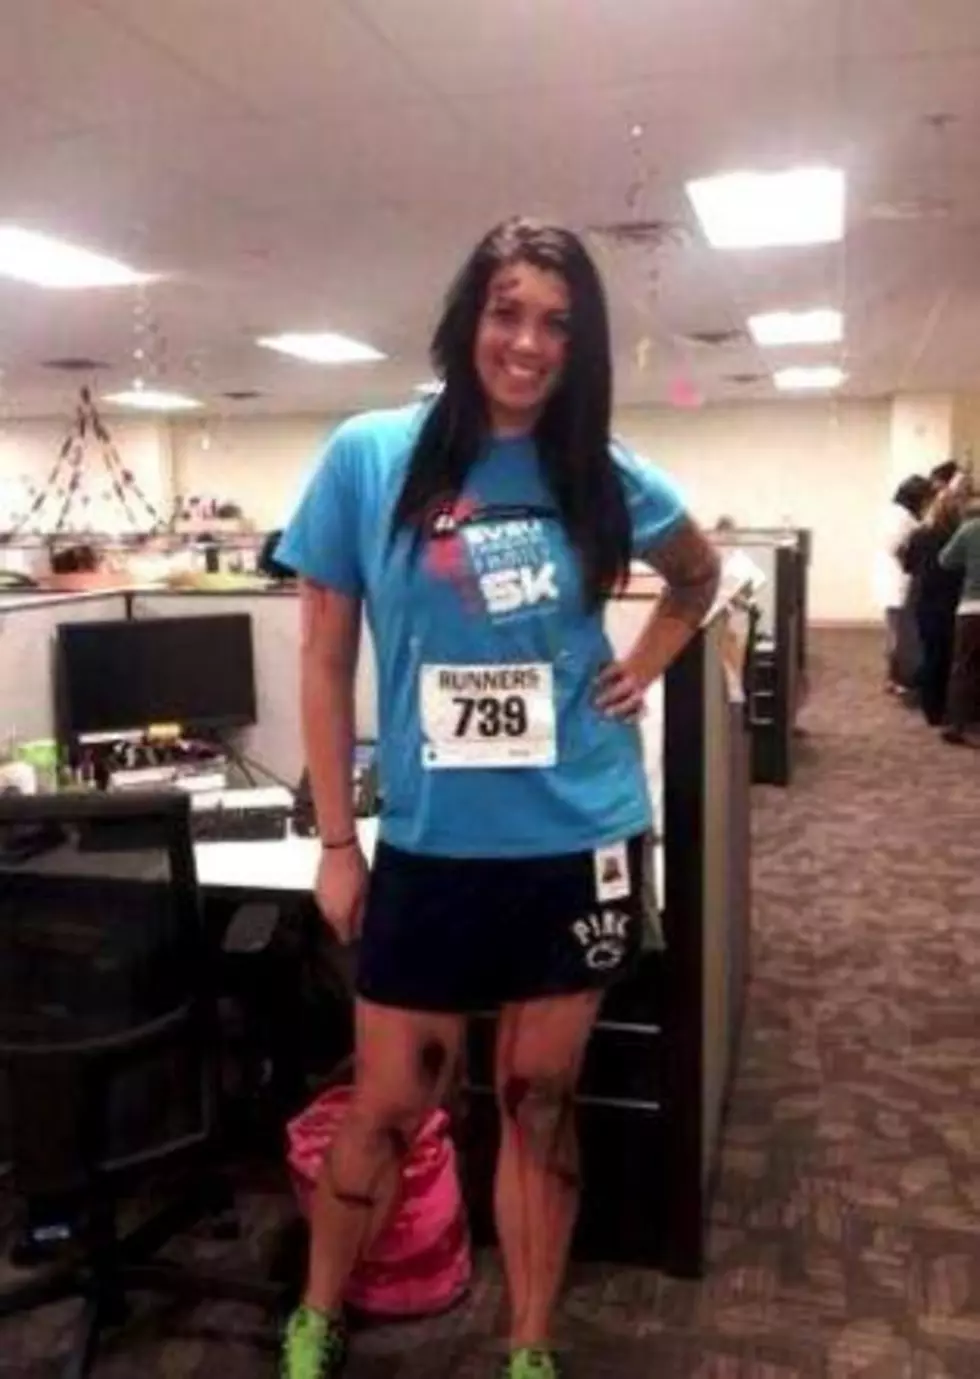 Woman Wearing Costume of Boston Marathon Bombing Victim Brings Threats – Justifiable Outrage or Bullying [POLL]